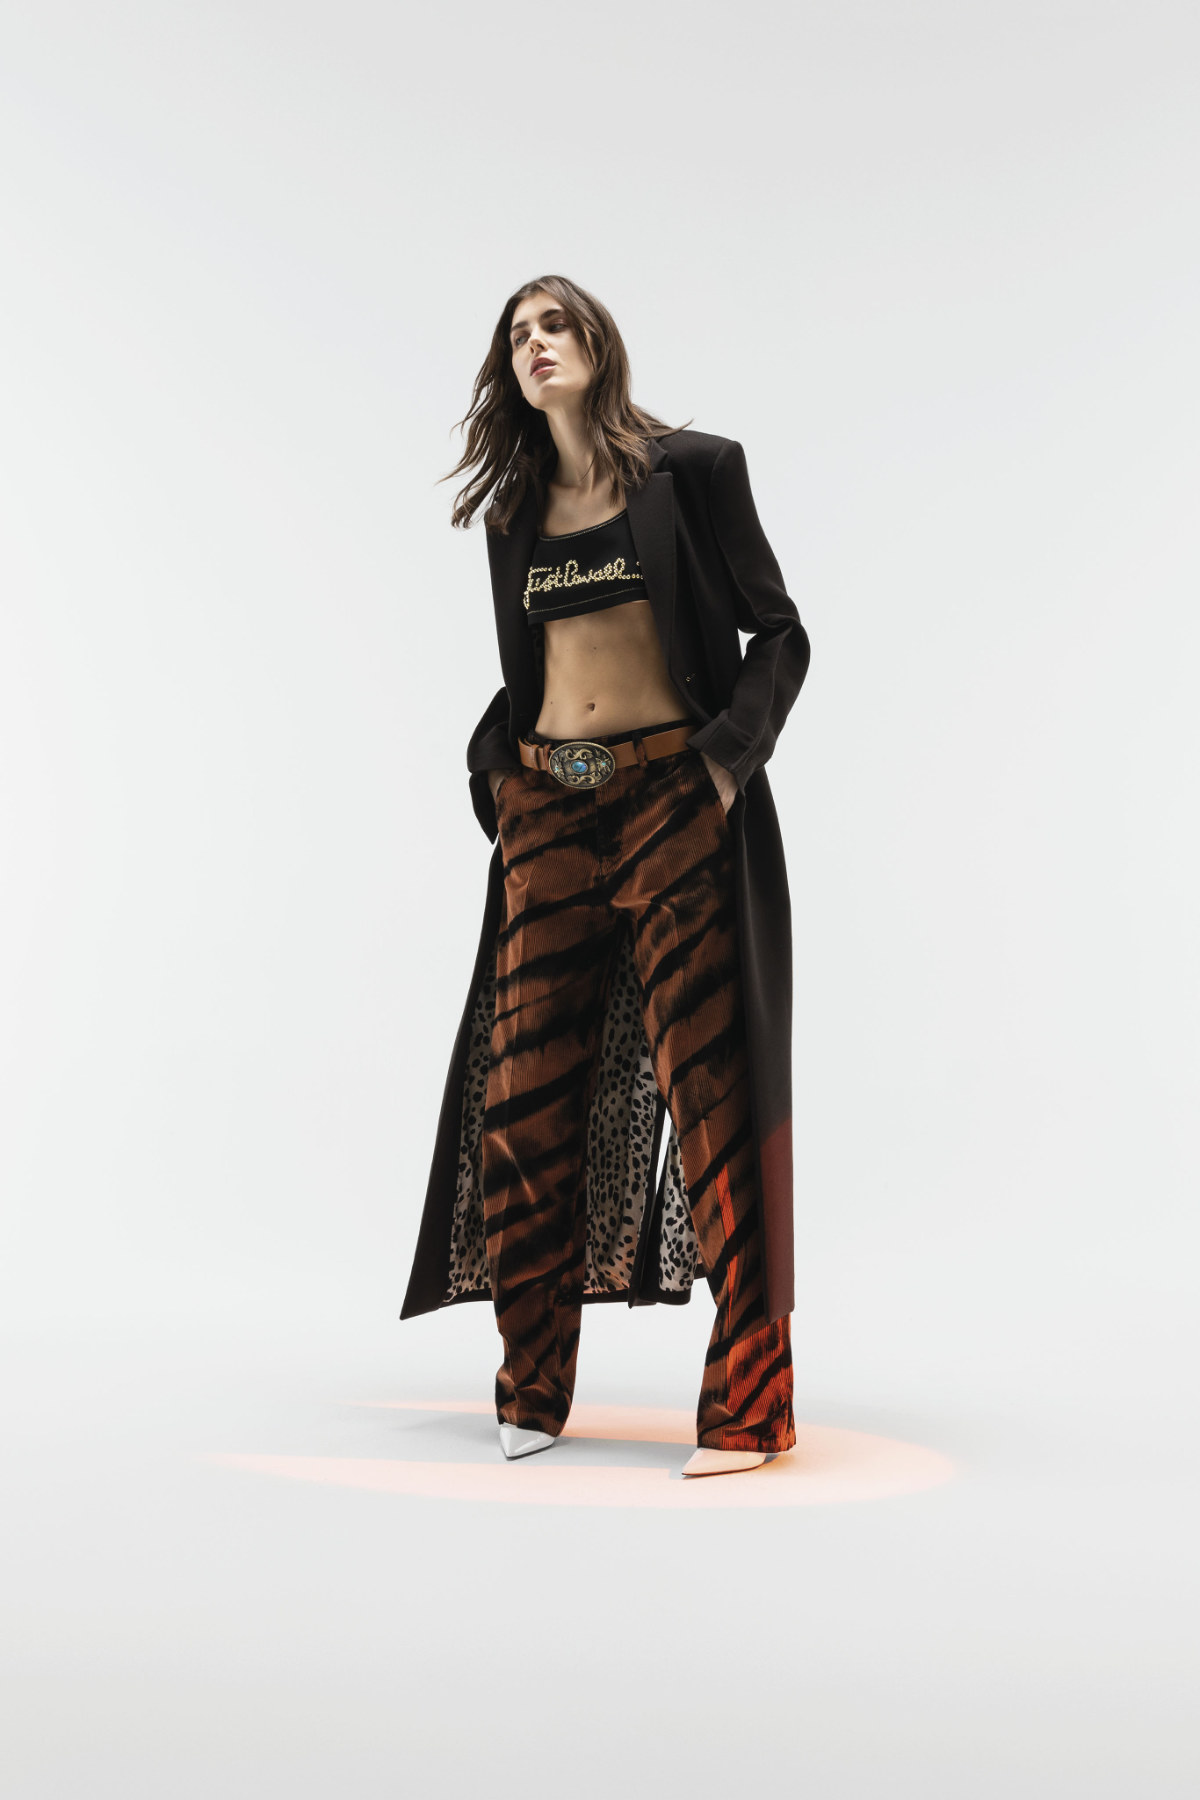 Just Cavalli Presents Its New Pre-Fall Collection 22 Womenswear And Menswear